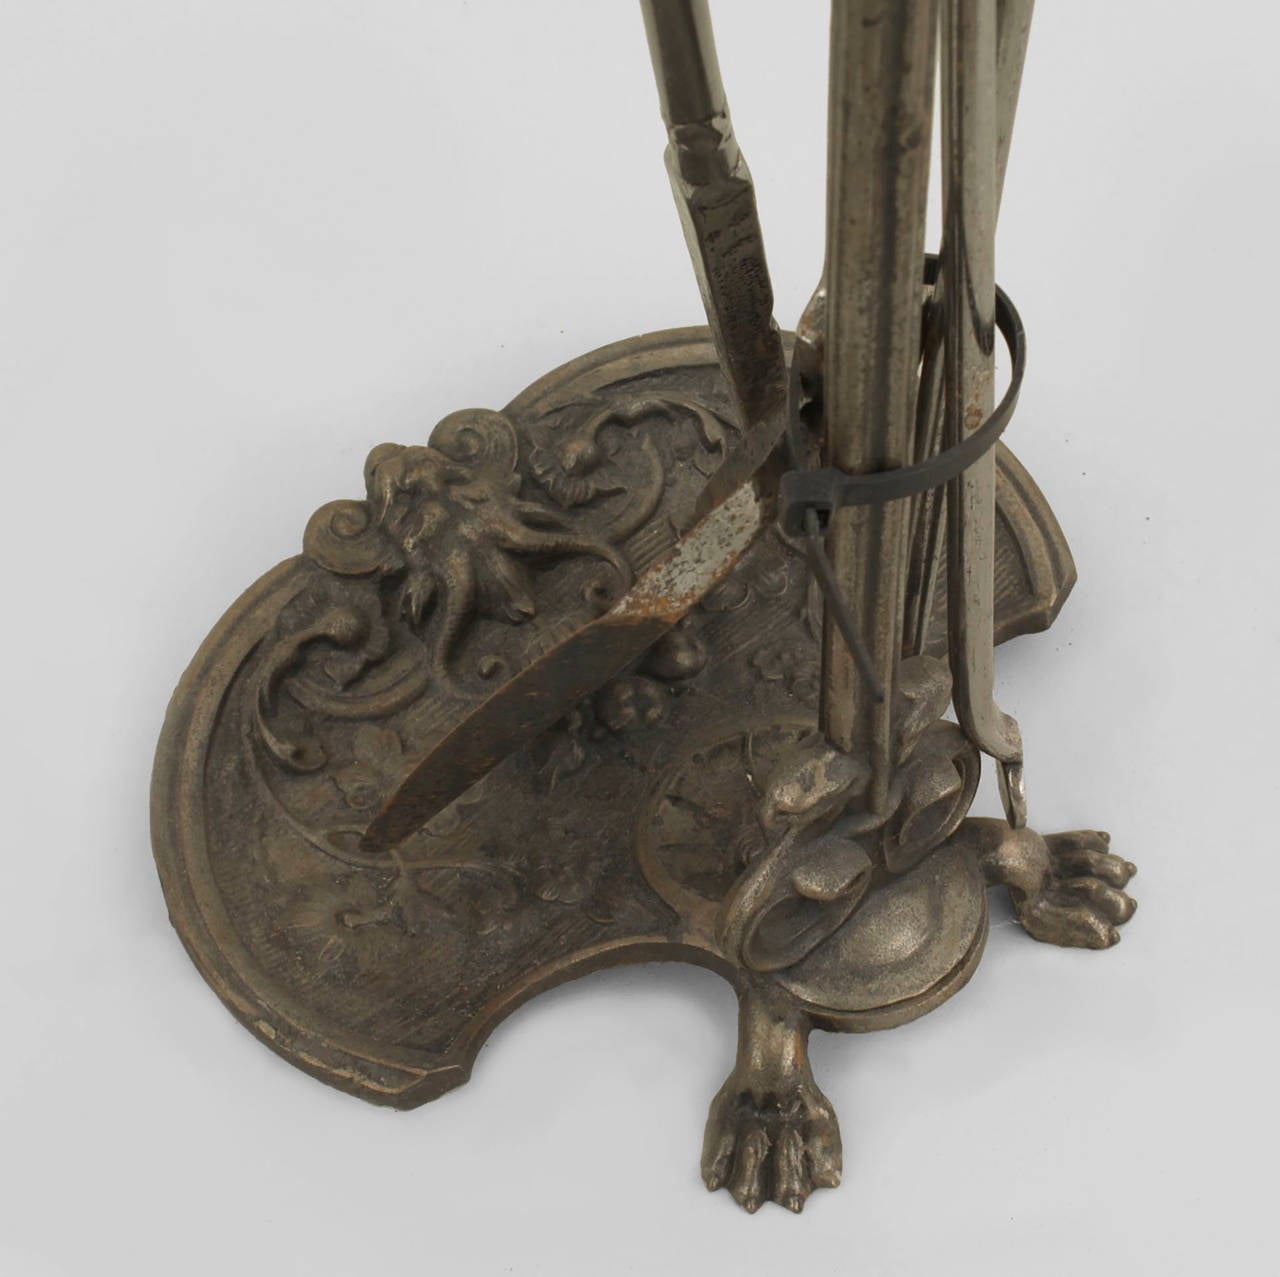 Set of 3 Continental (Probably German 19th Century) steel fire tools on an elaborately chased stand with a bear head finial top.
